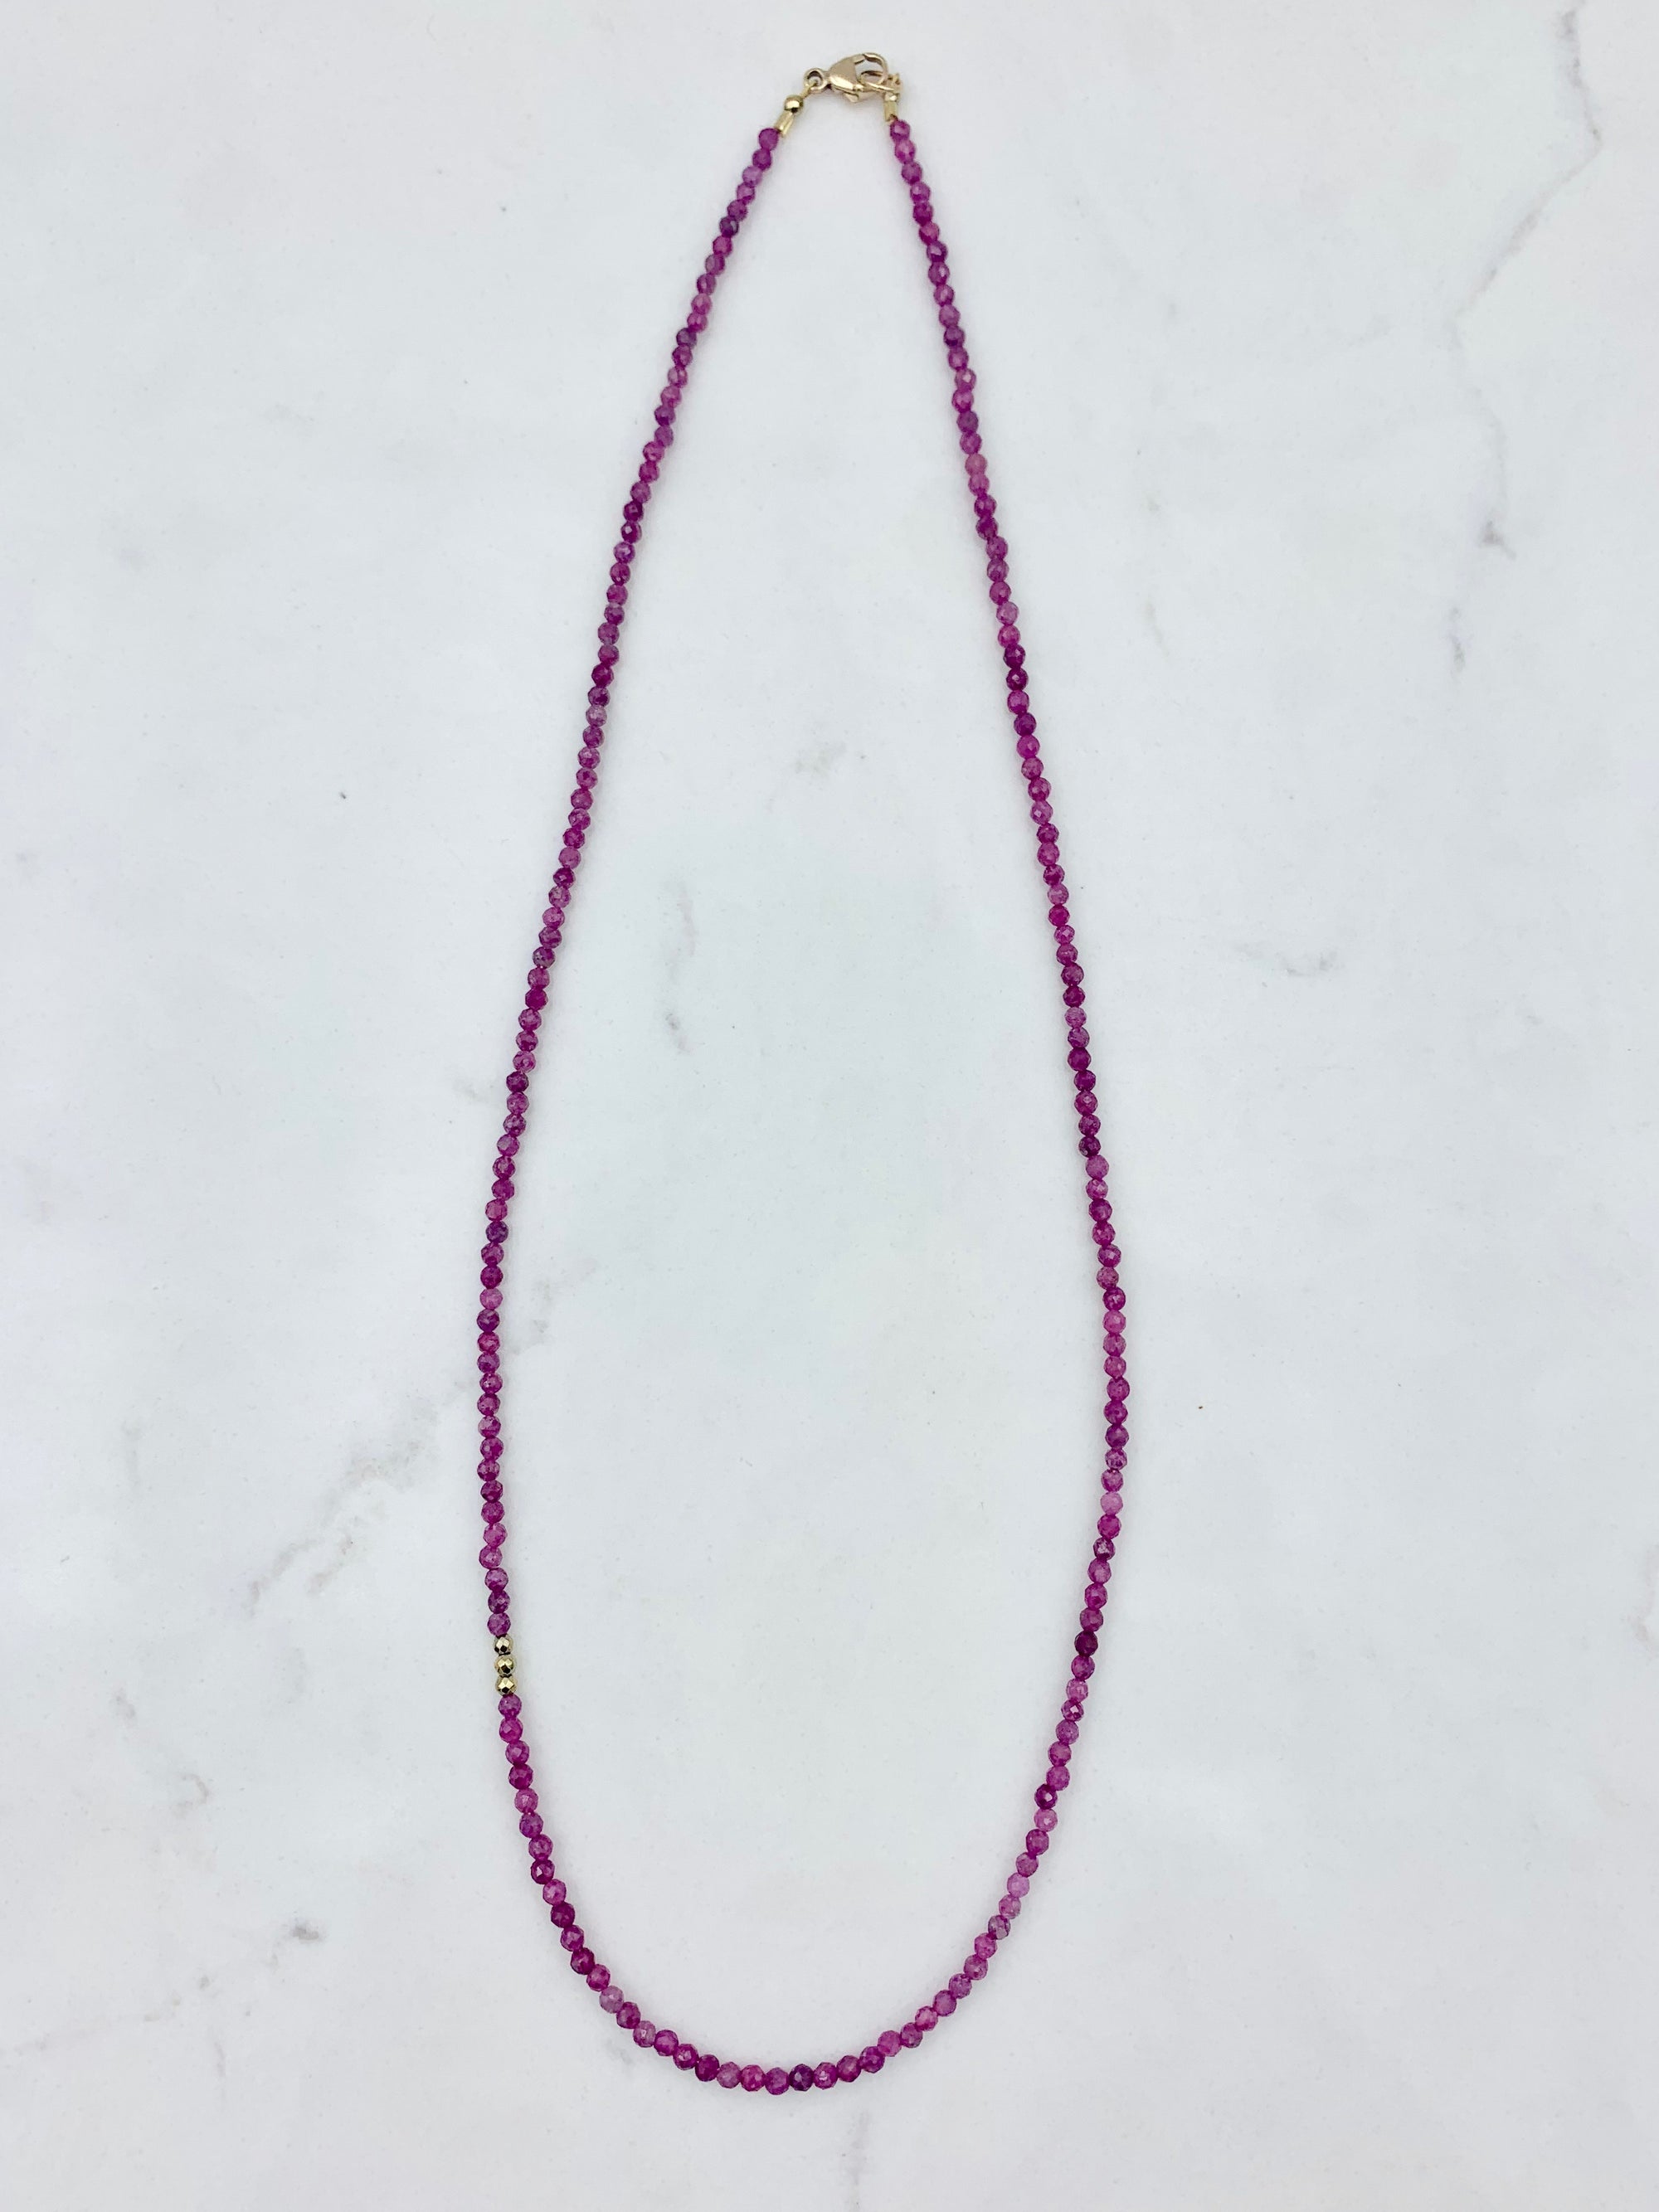 Starlight Intention Necklace in Ruby